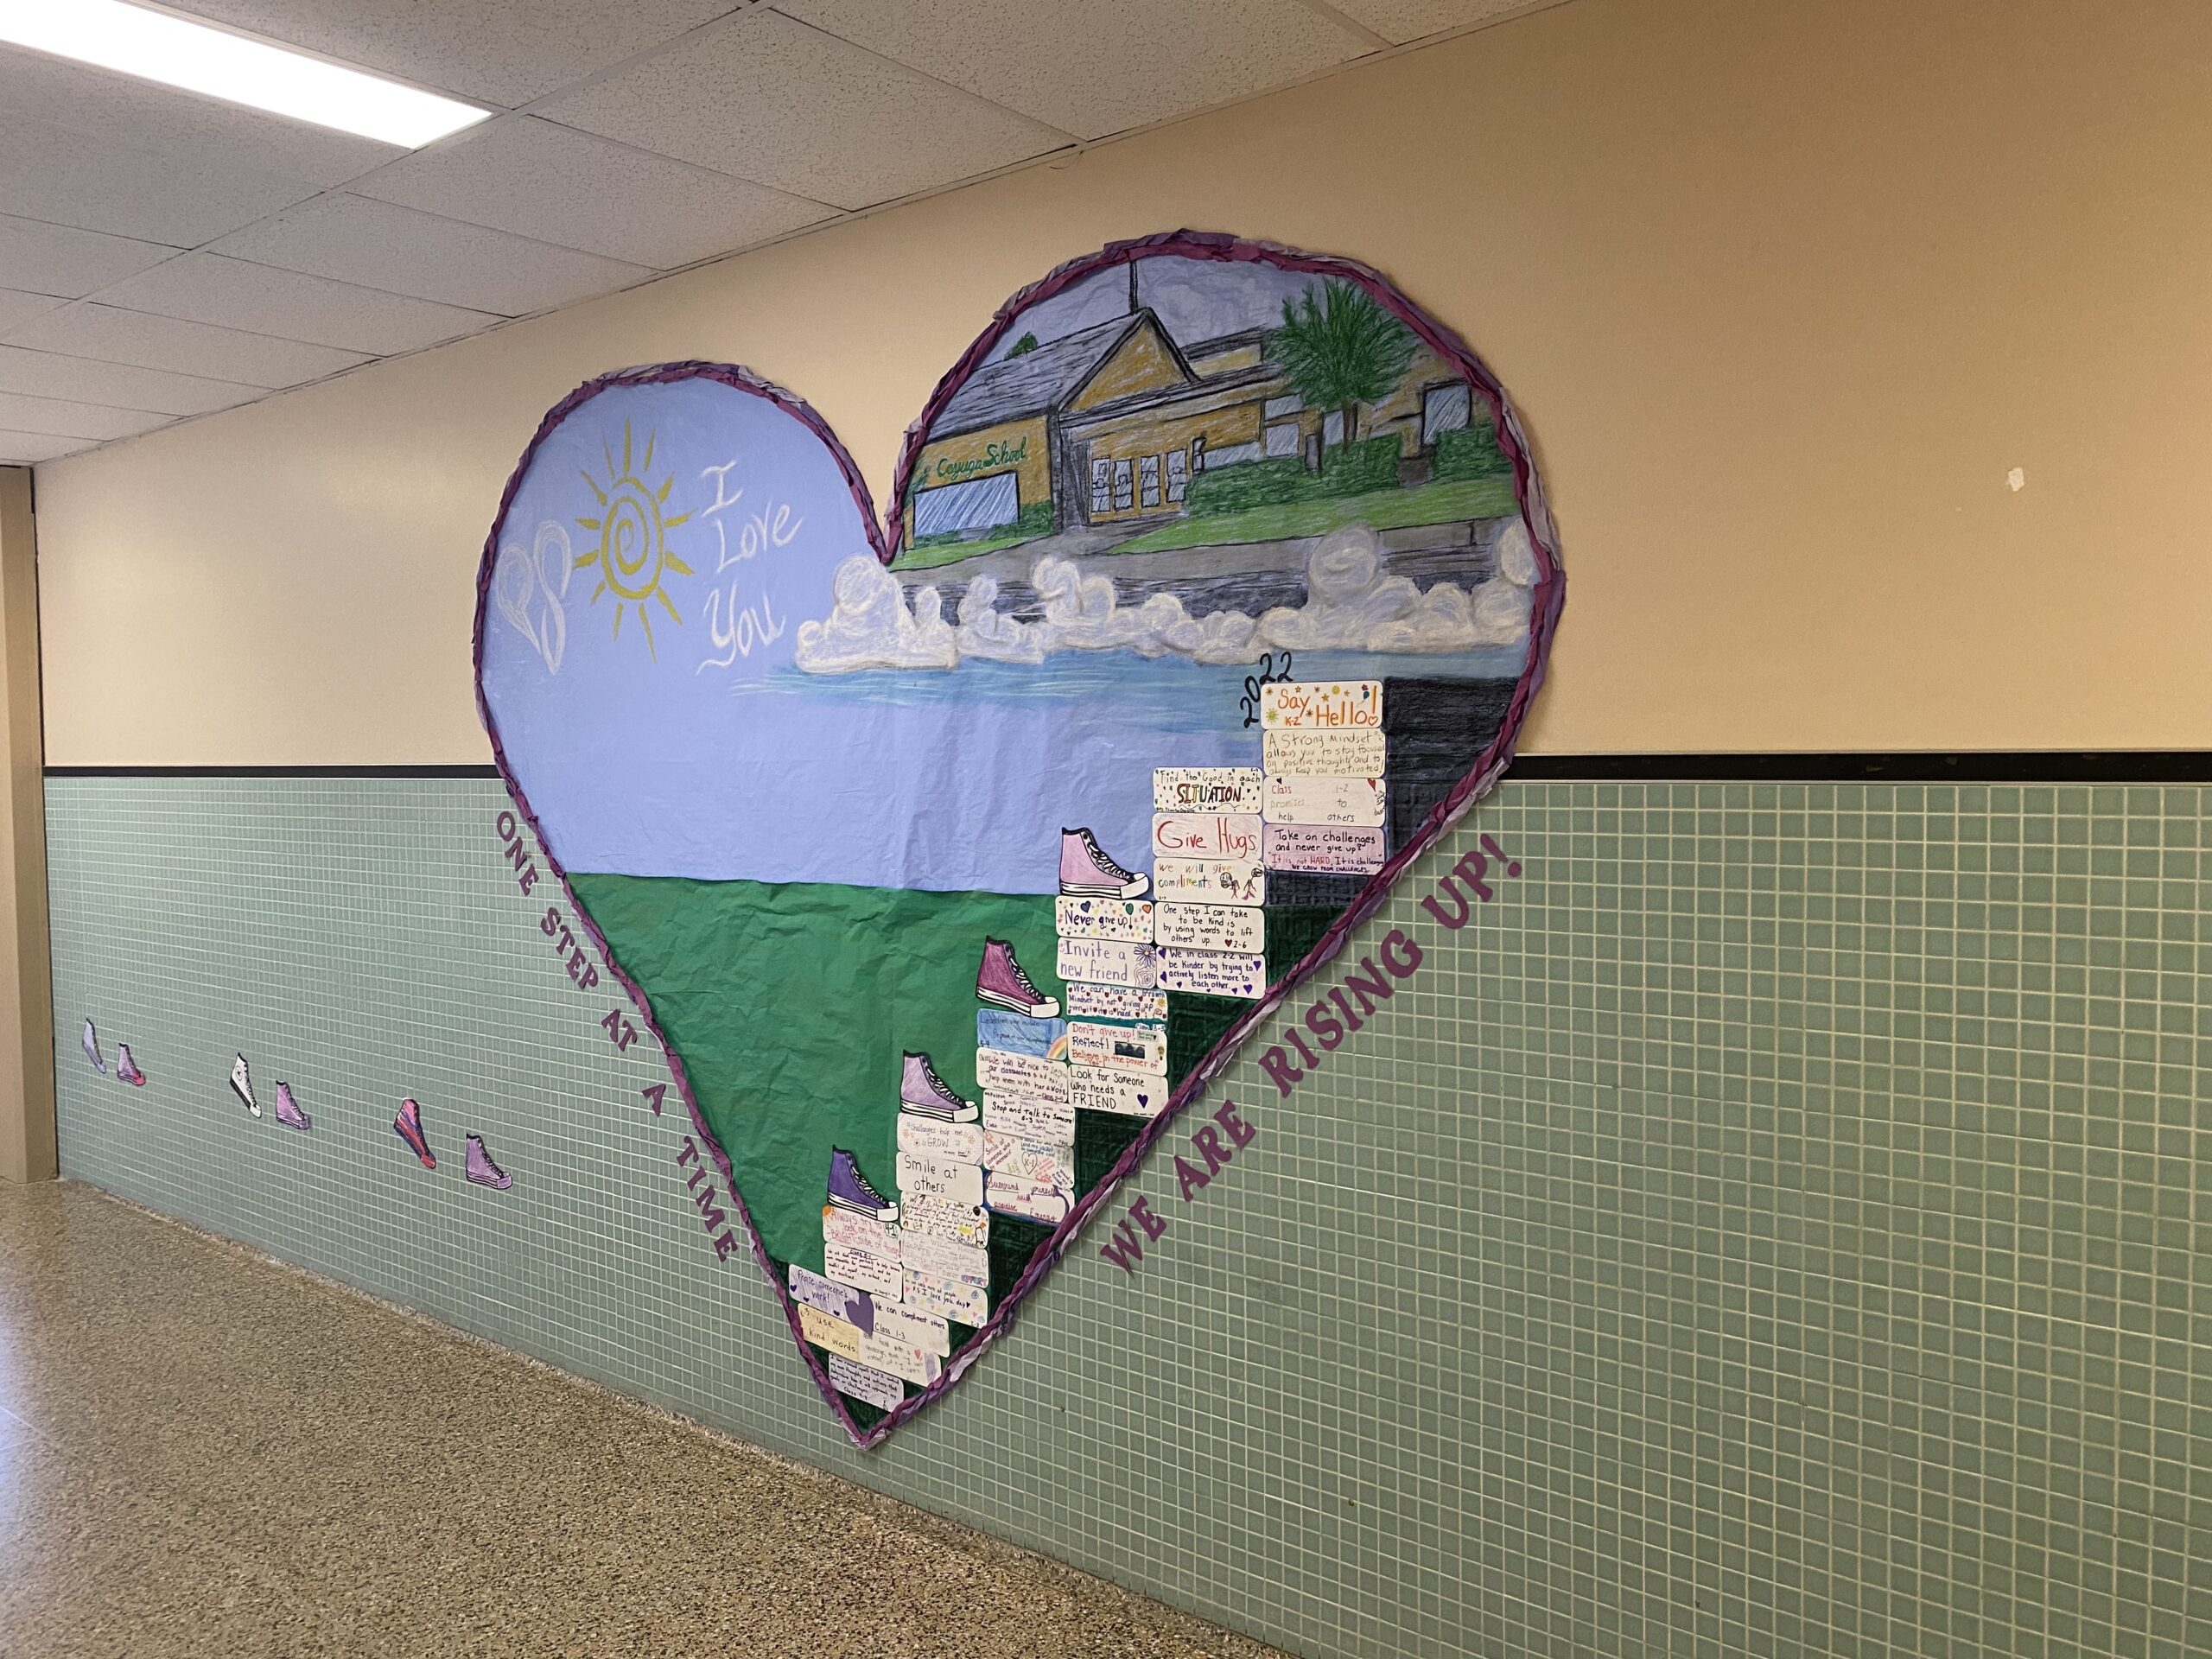 Cayuga Elementary School students decorated for P.S. I Love You Day last year. COURTESY CAYUGA ELEMENTARY SCHOOL